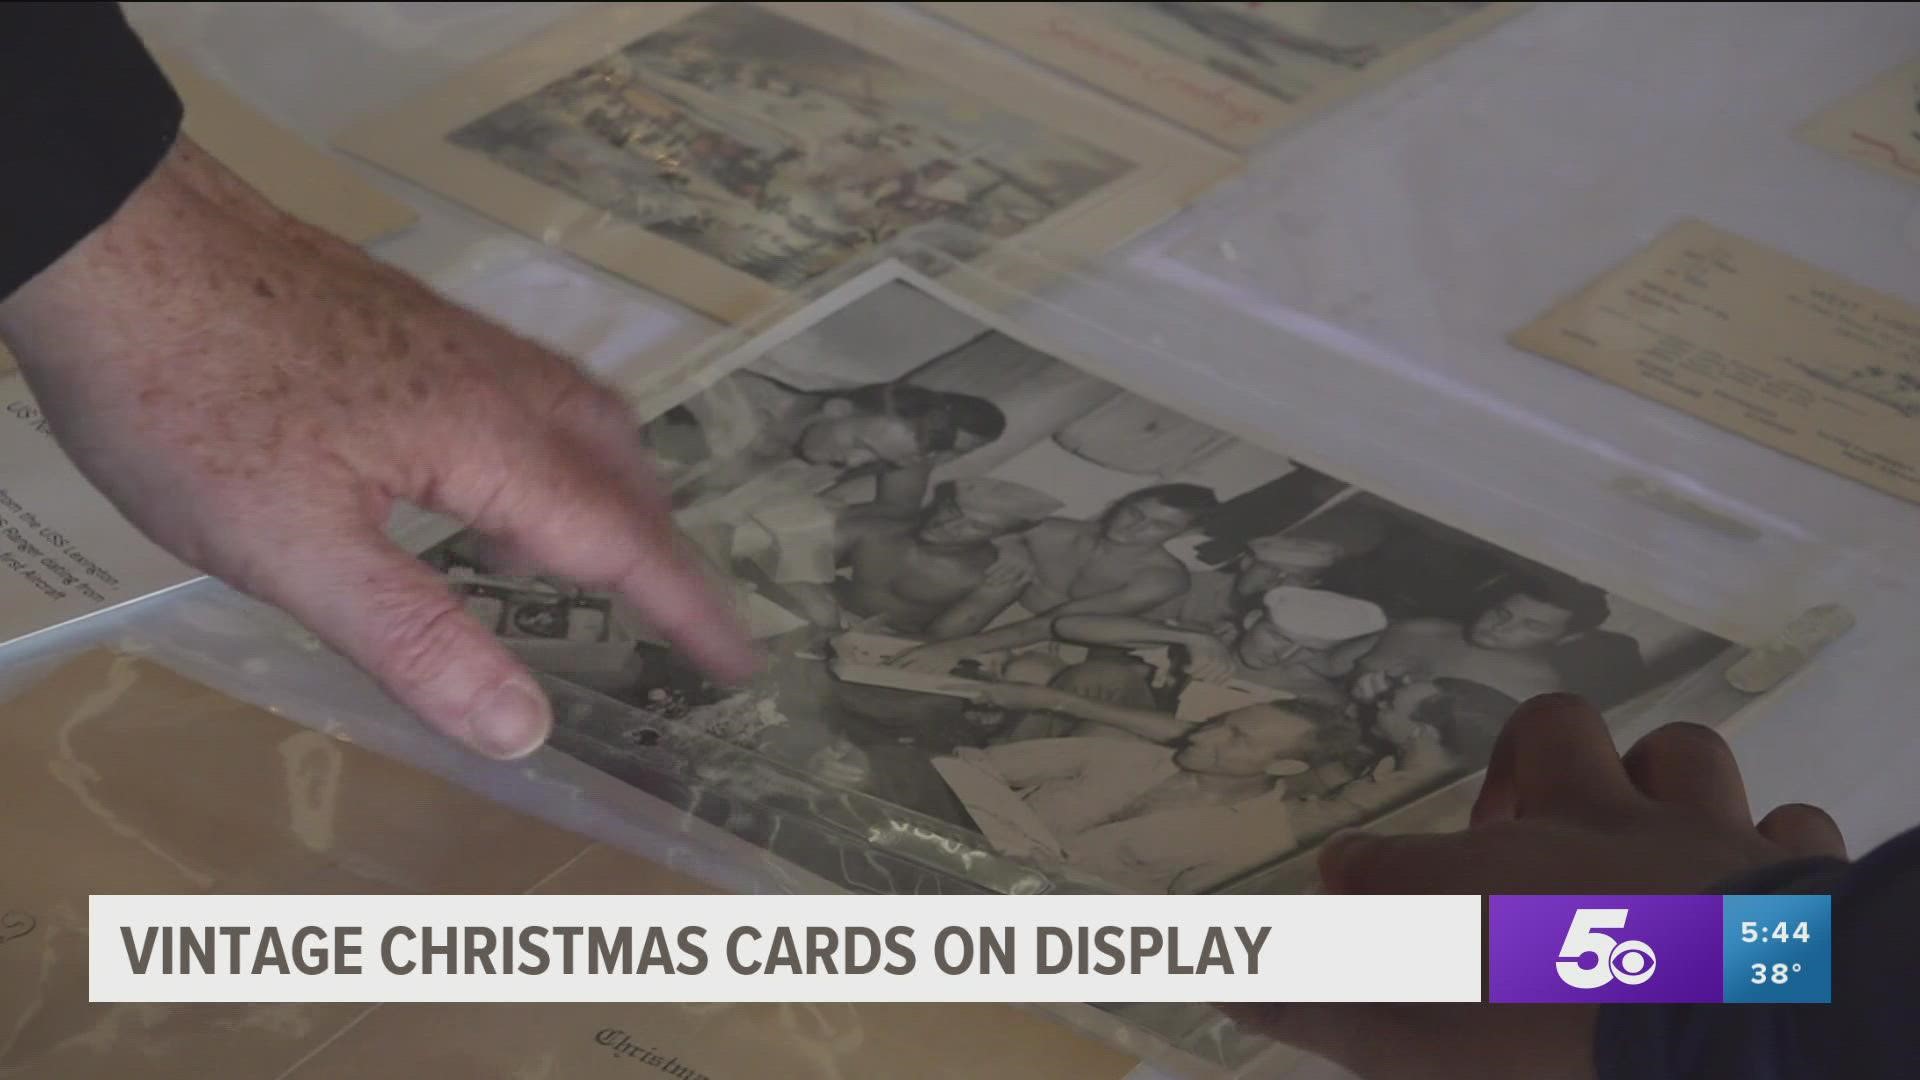 Veteran's Christmas cards, letters, and more were on display in Fayetteville this weekend.